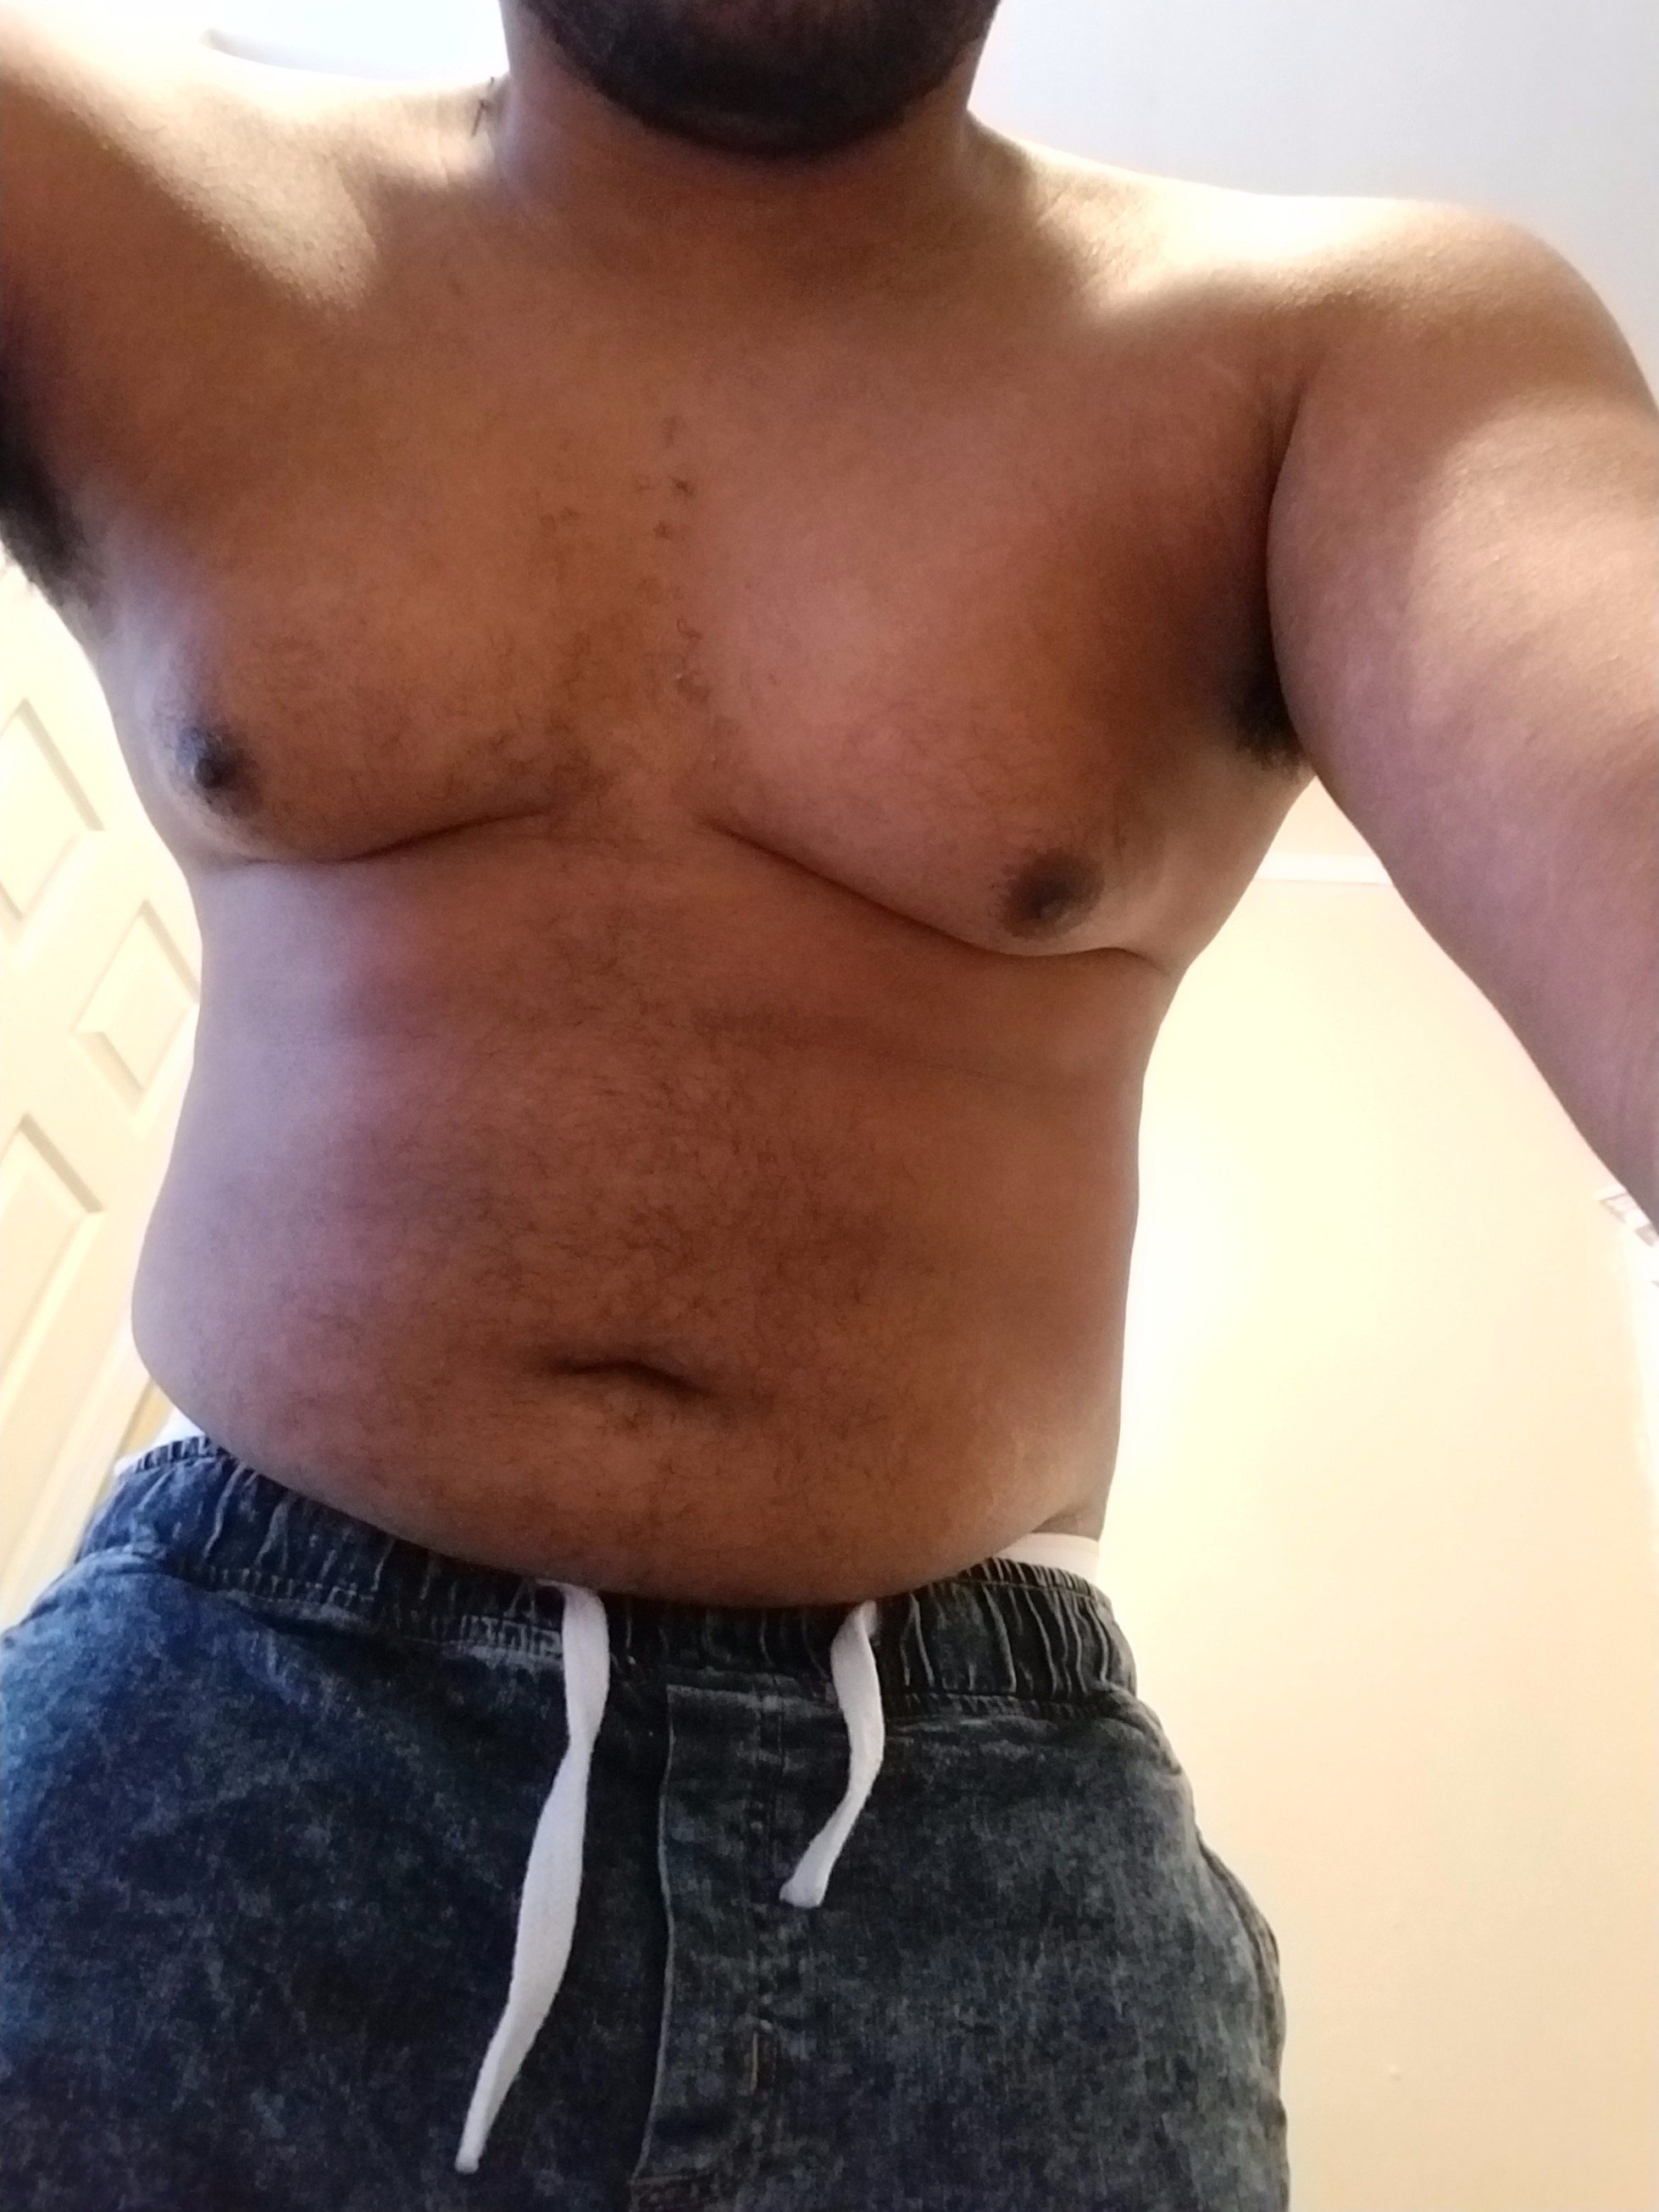 I'm chubby/thick dude. Whatever you see it as. 

Always down to chat. Don't be shy.